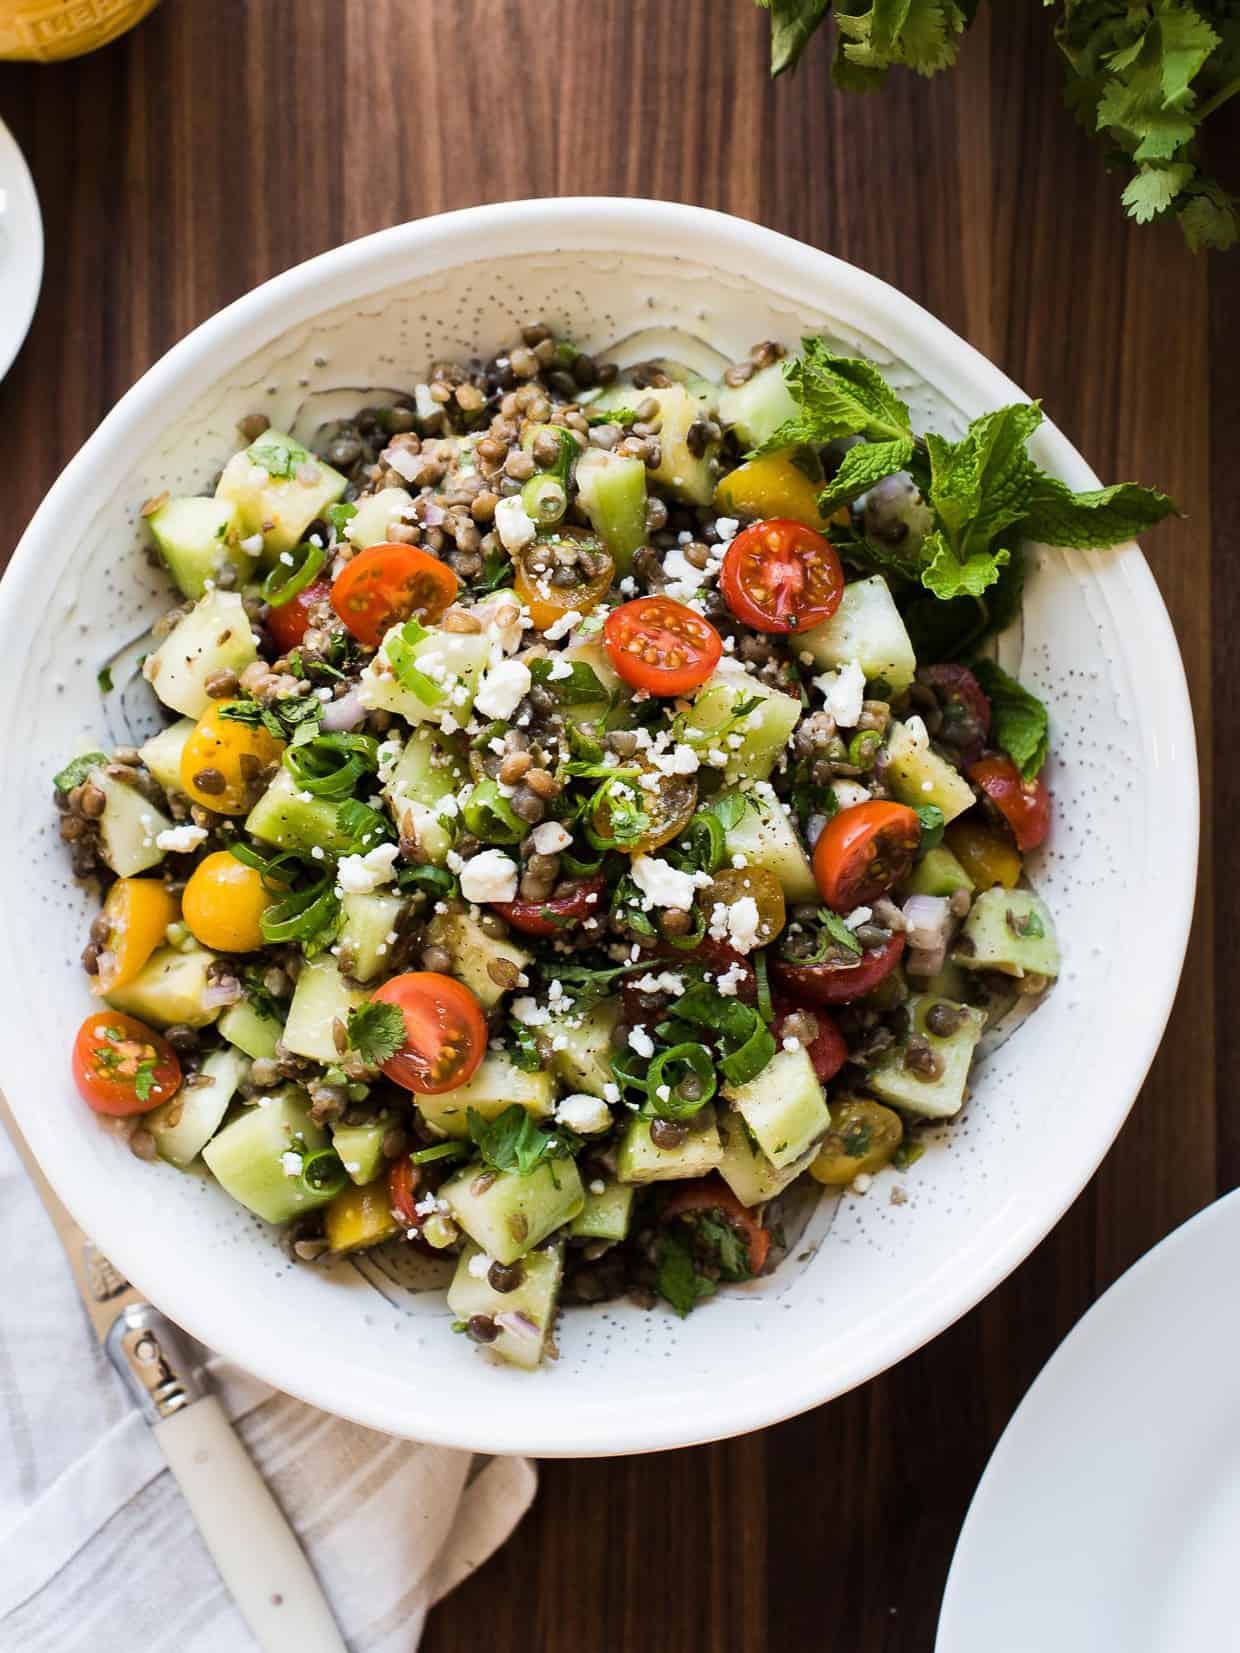 Summer Lentil Salad with lentils, cucumbers, tomatoes, and mint in a white bowl.